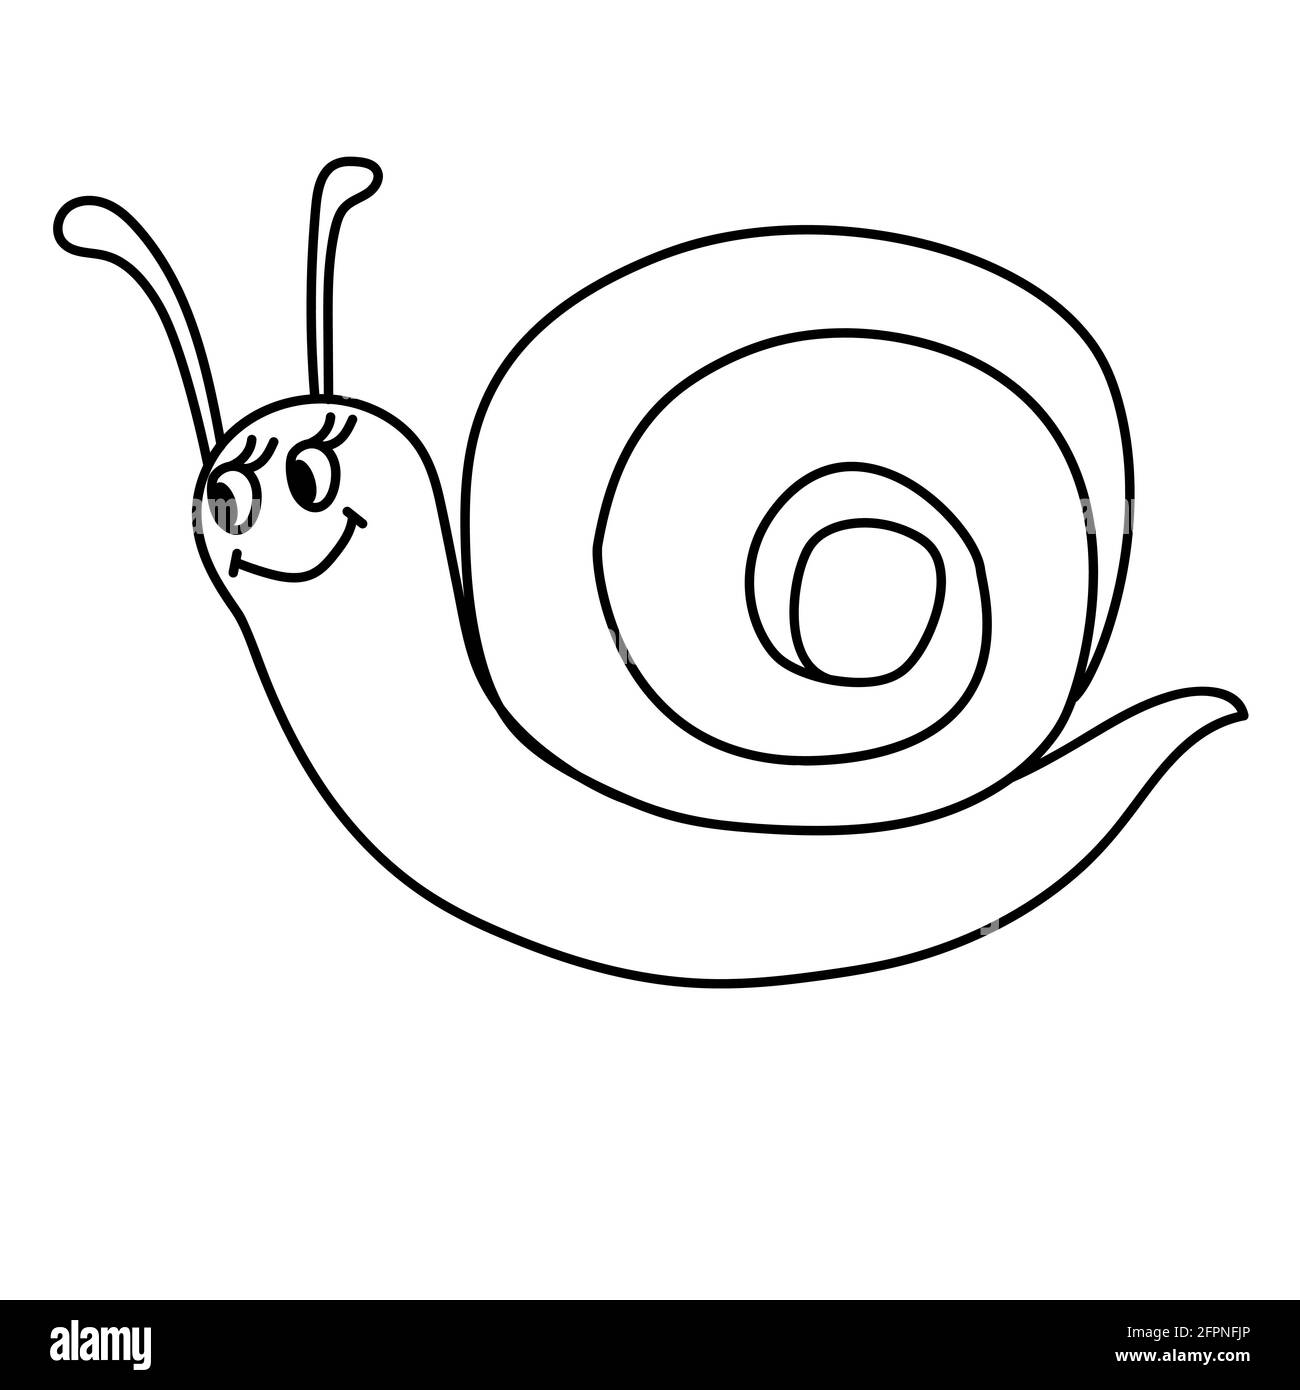 Snail coloring page isolated vector illustration Stock Vector ...